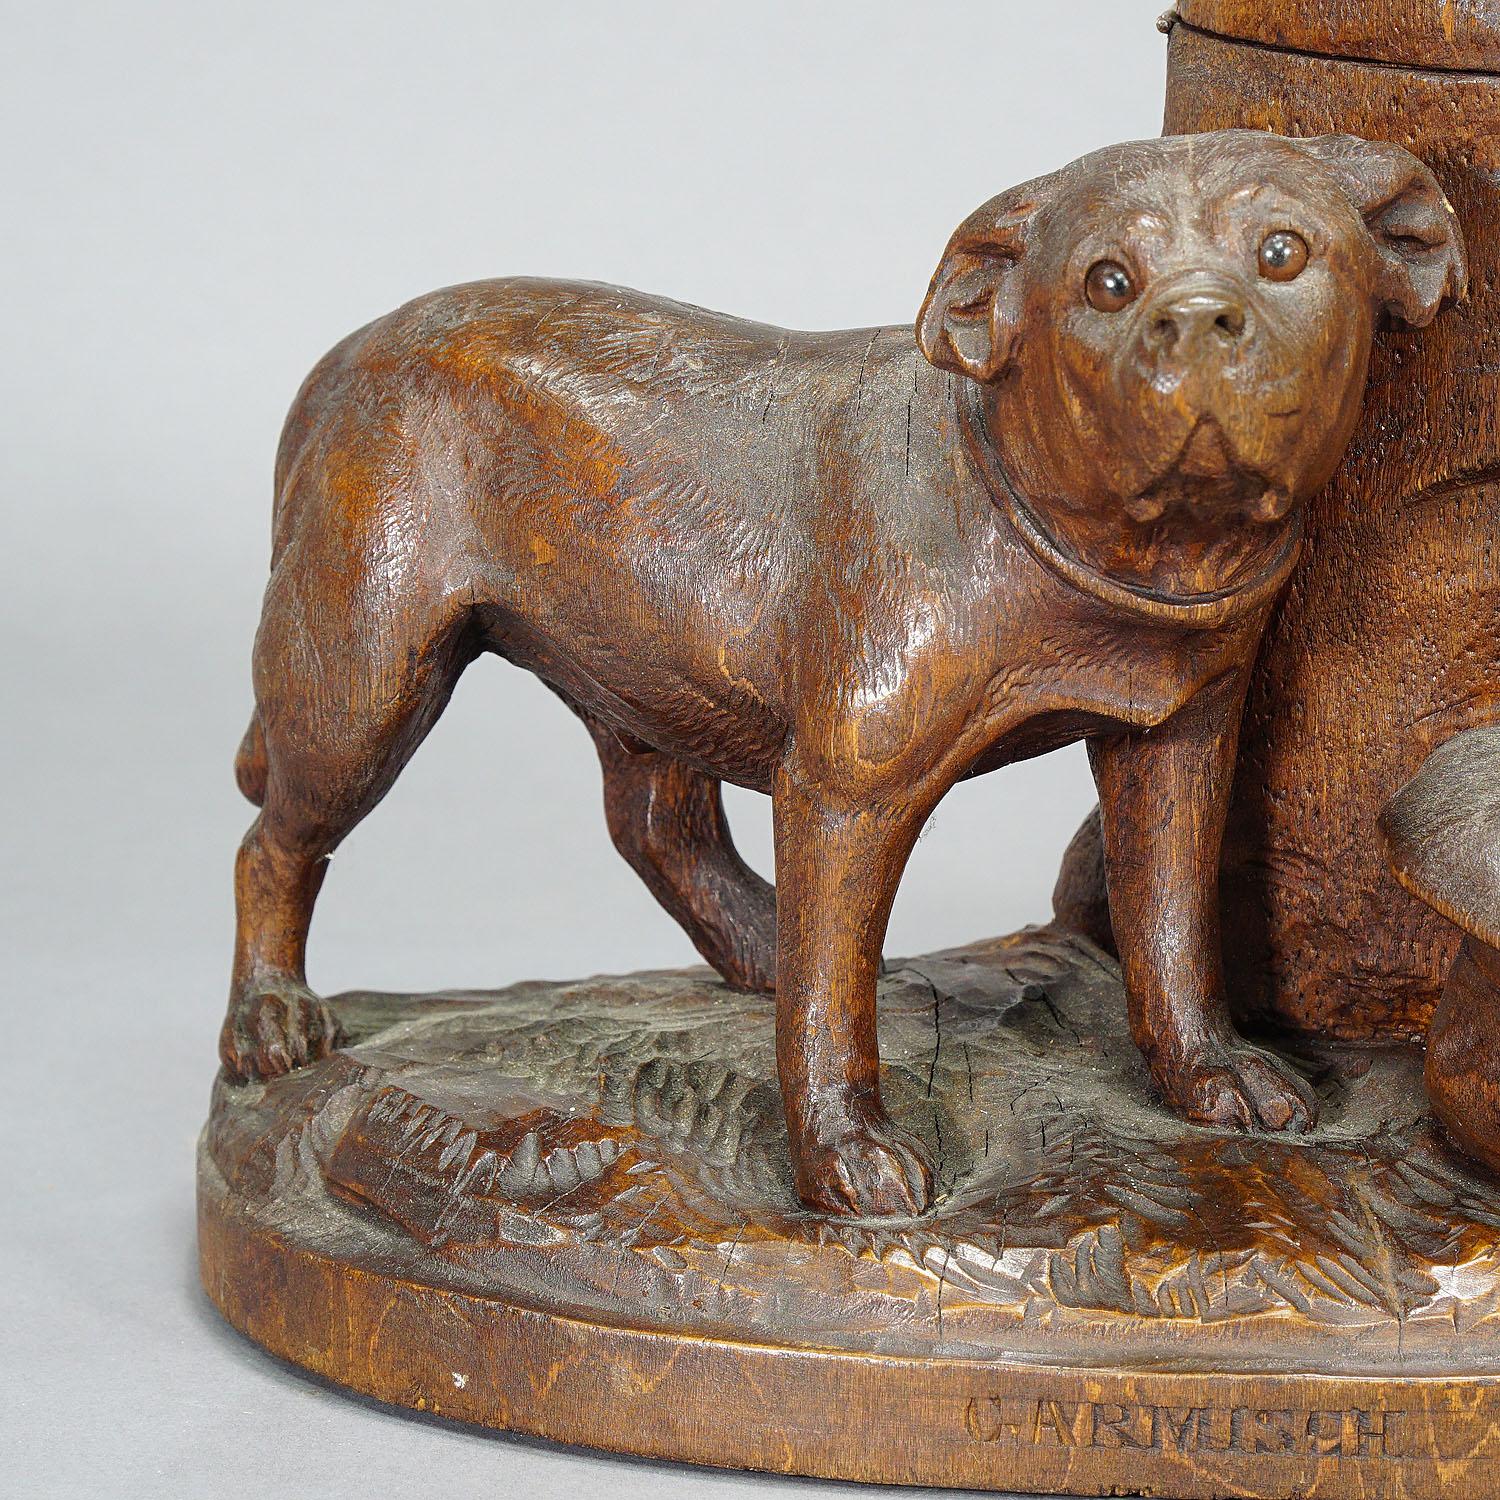 Wooden Carved Tobacco Box with Boxer, Switzerland ca. 1900

An early 20th century wooden carved humidor from Switzerland featuring a boxer dog beside a three trunk on witch the top can be flipped back to open the tobacco storage. In front of the